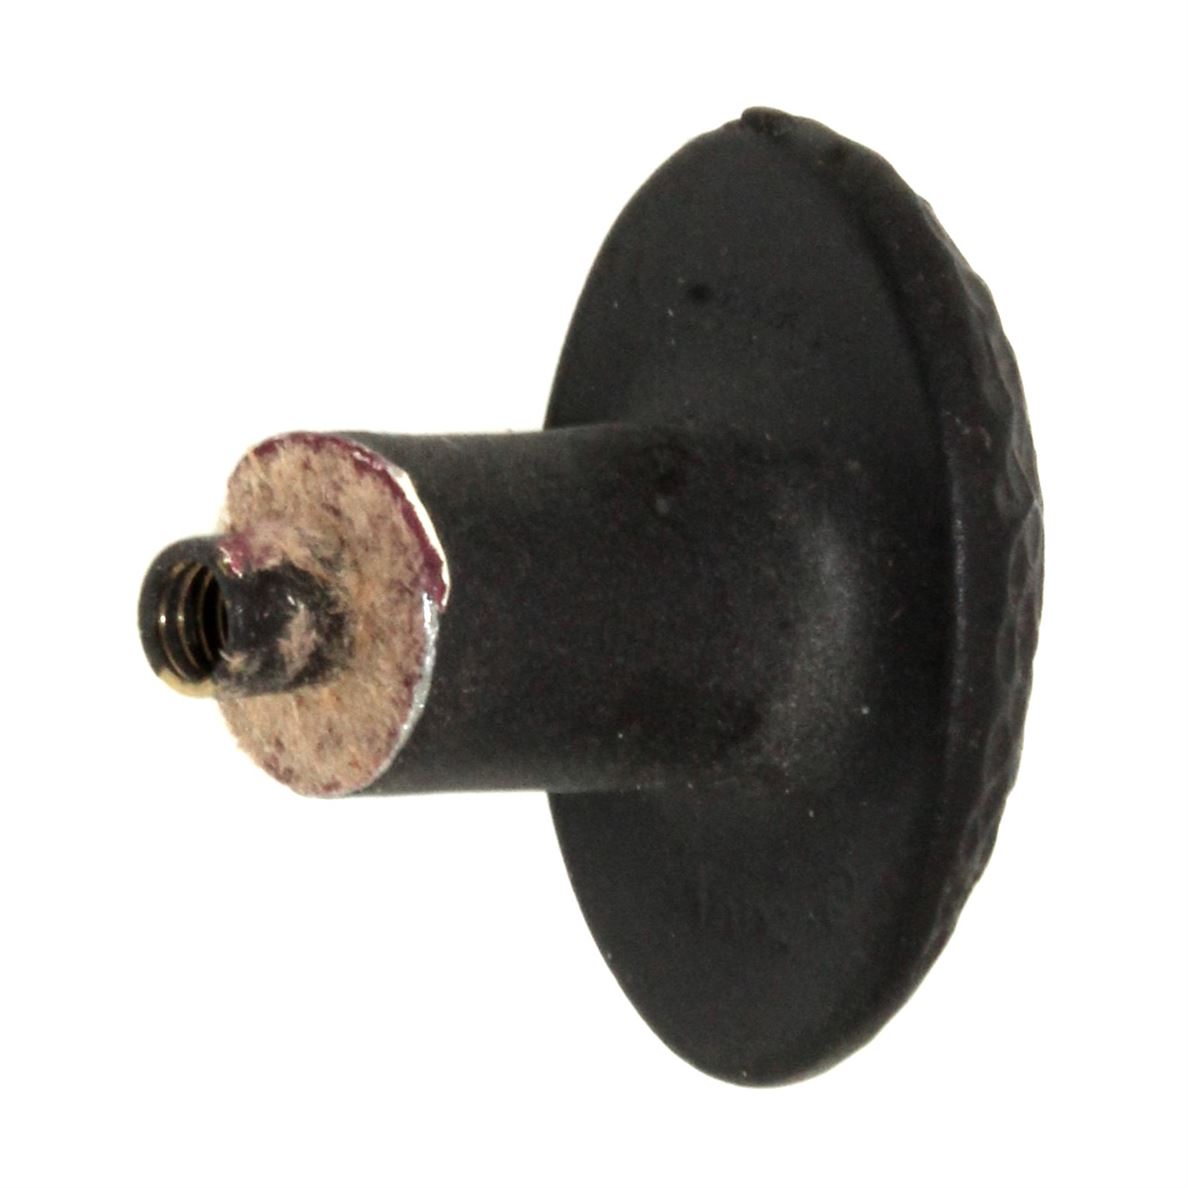 Anne at Home Artisan Hammersmith Small 1 1/4" Rustic Cabinet Knob Black 1266-7